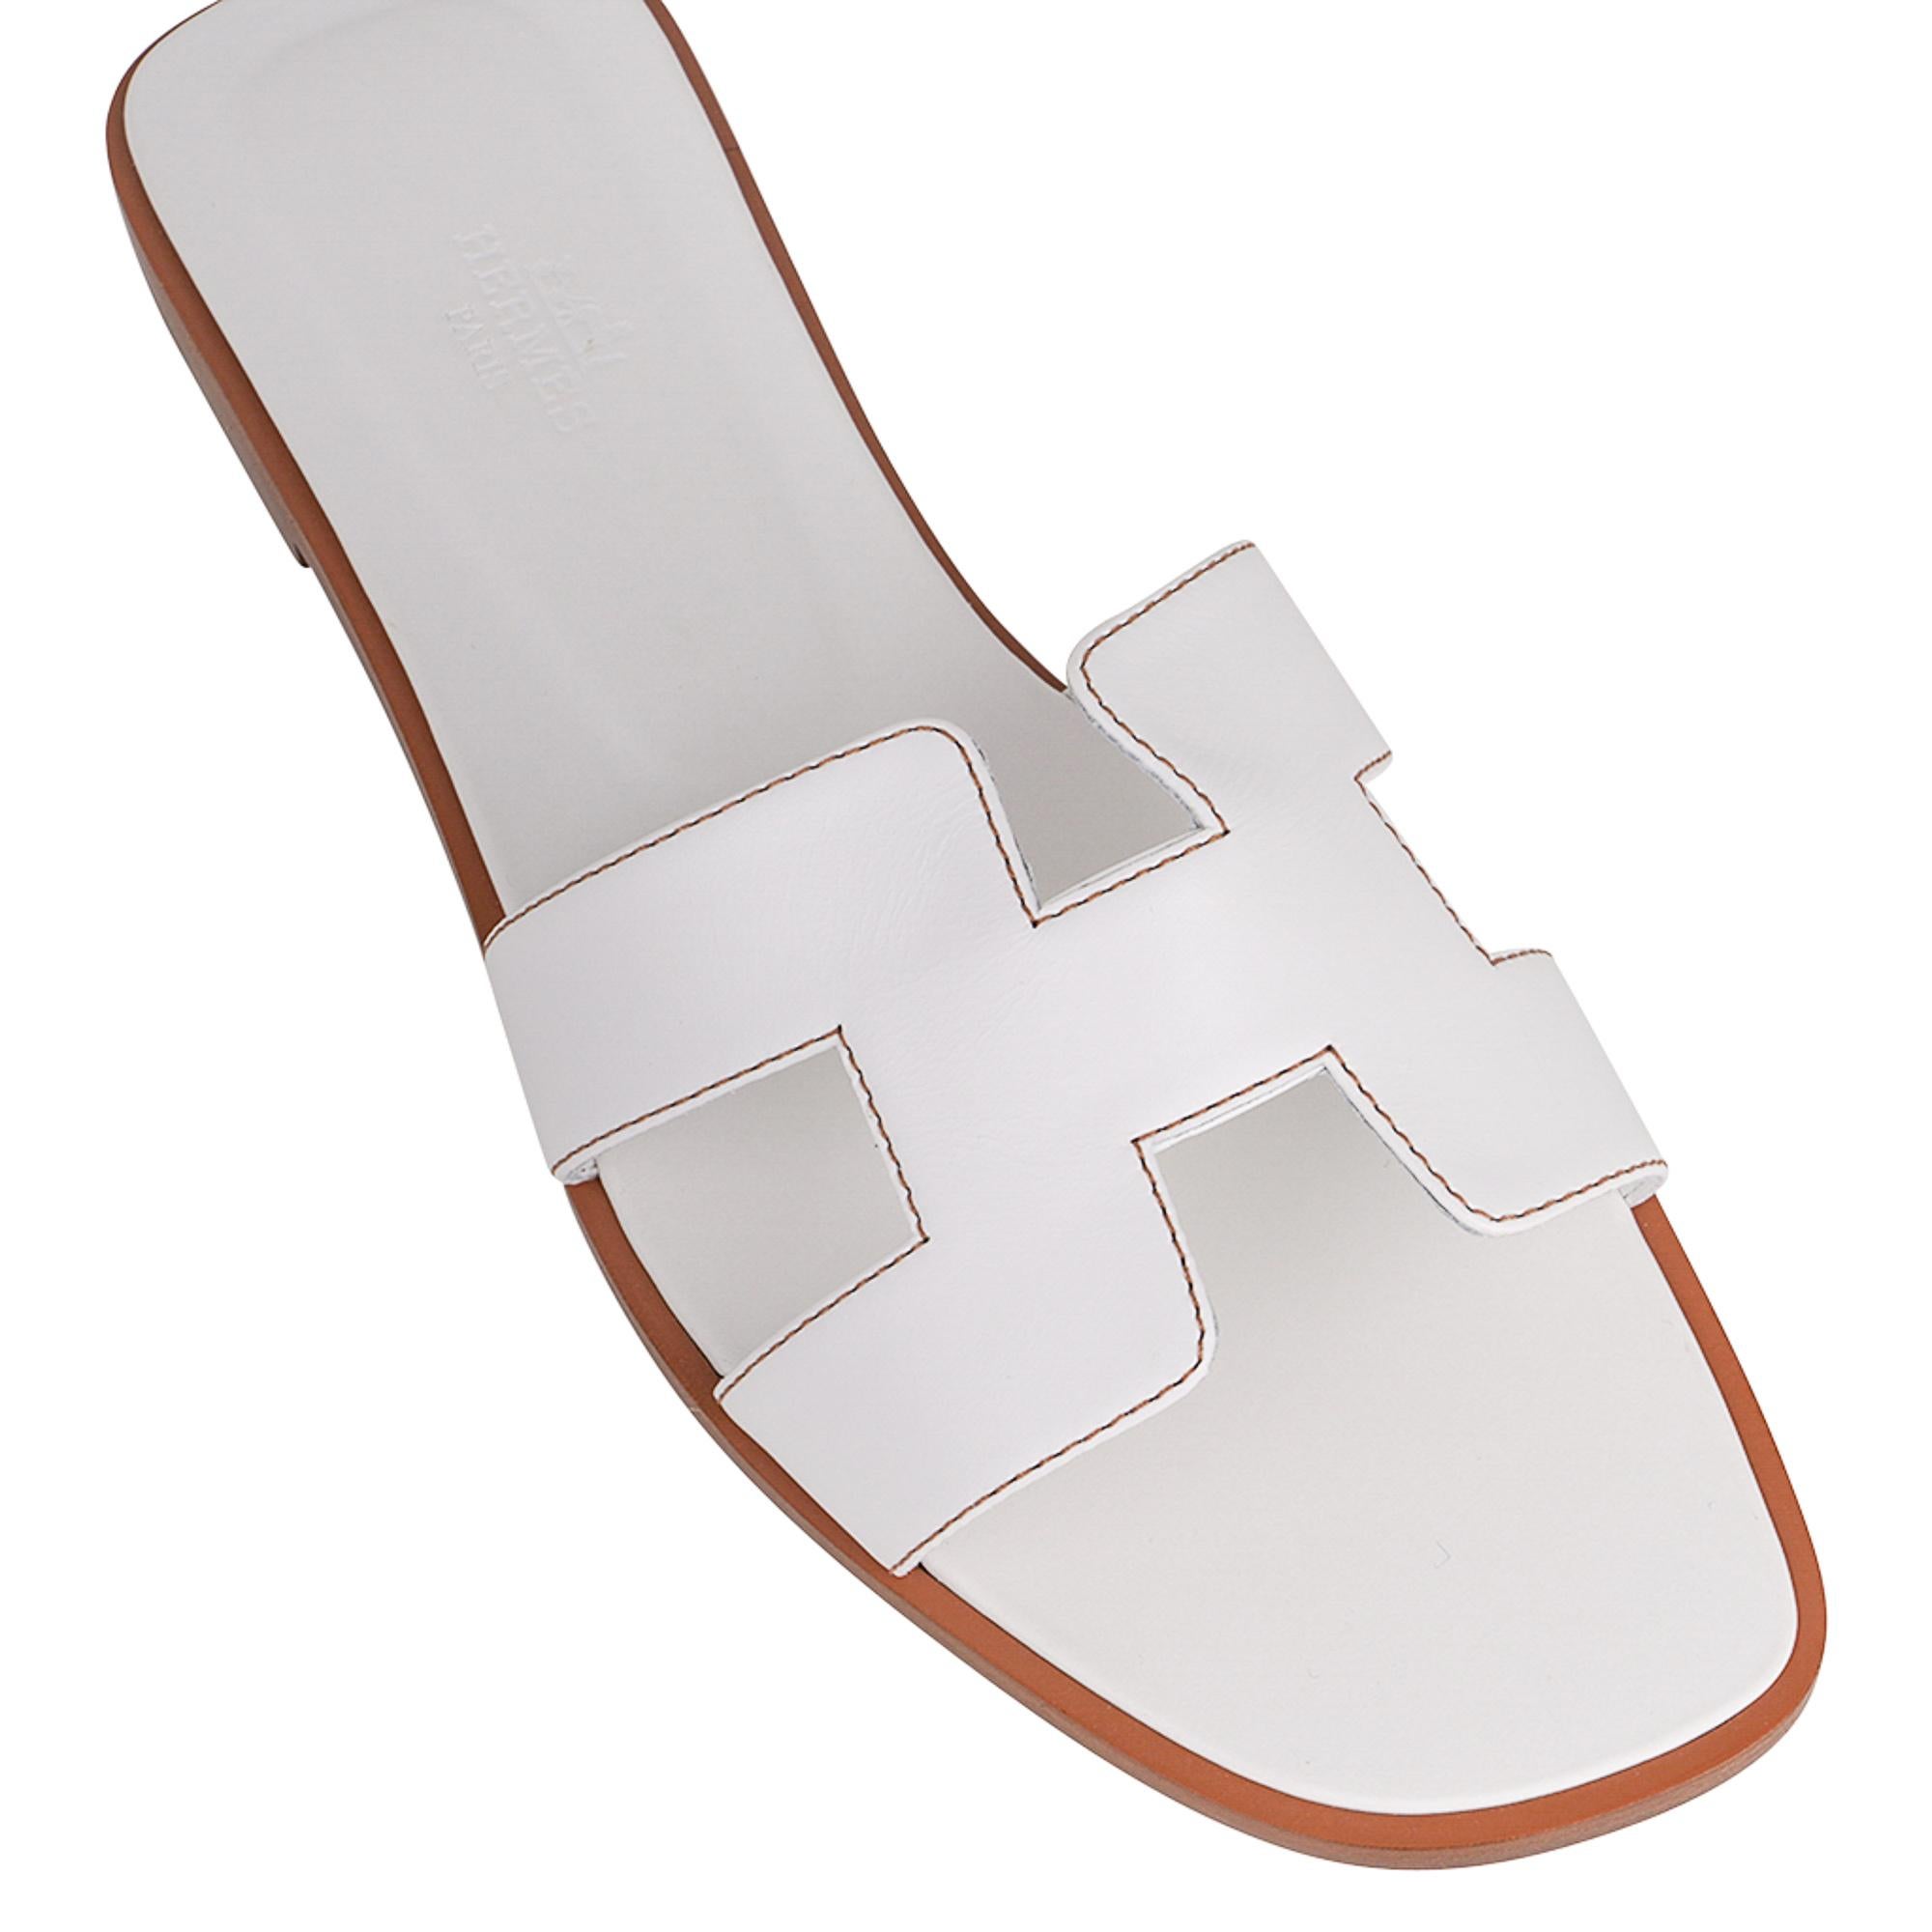 Mightychic offers an Hermes Oran sandal iconic slide featured in White with Havane topstitch.
The signature H cutout over the top of the foot in sublime calfskin.
White embossed calfskin insole. 
Wood heel with leather sole. 
Comes with sleepers,